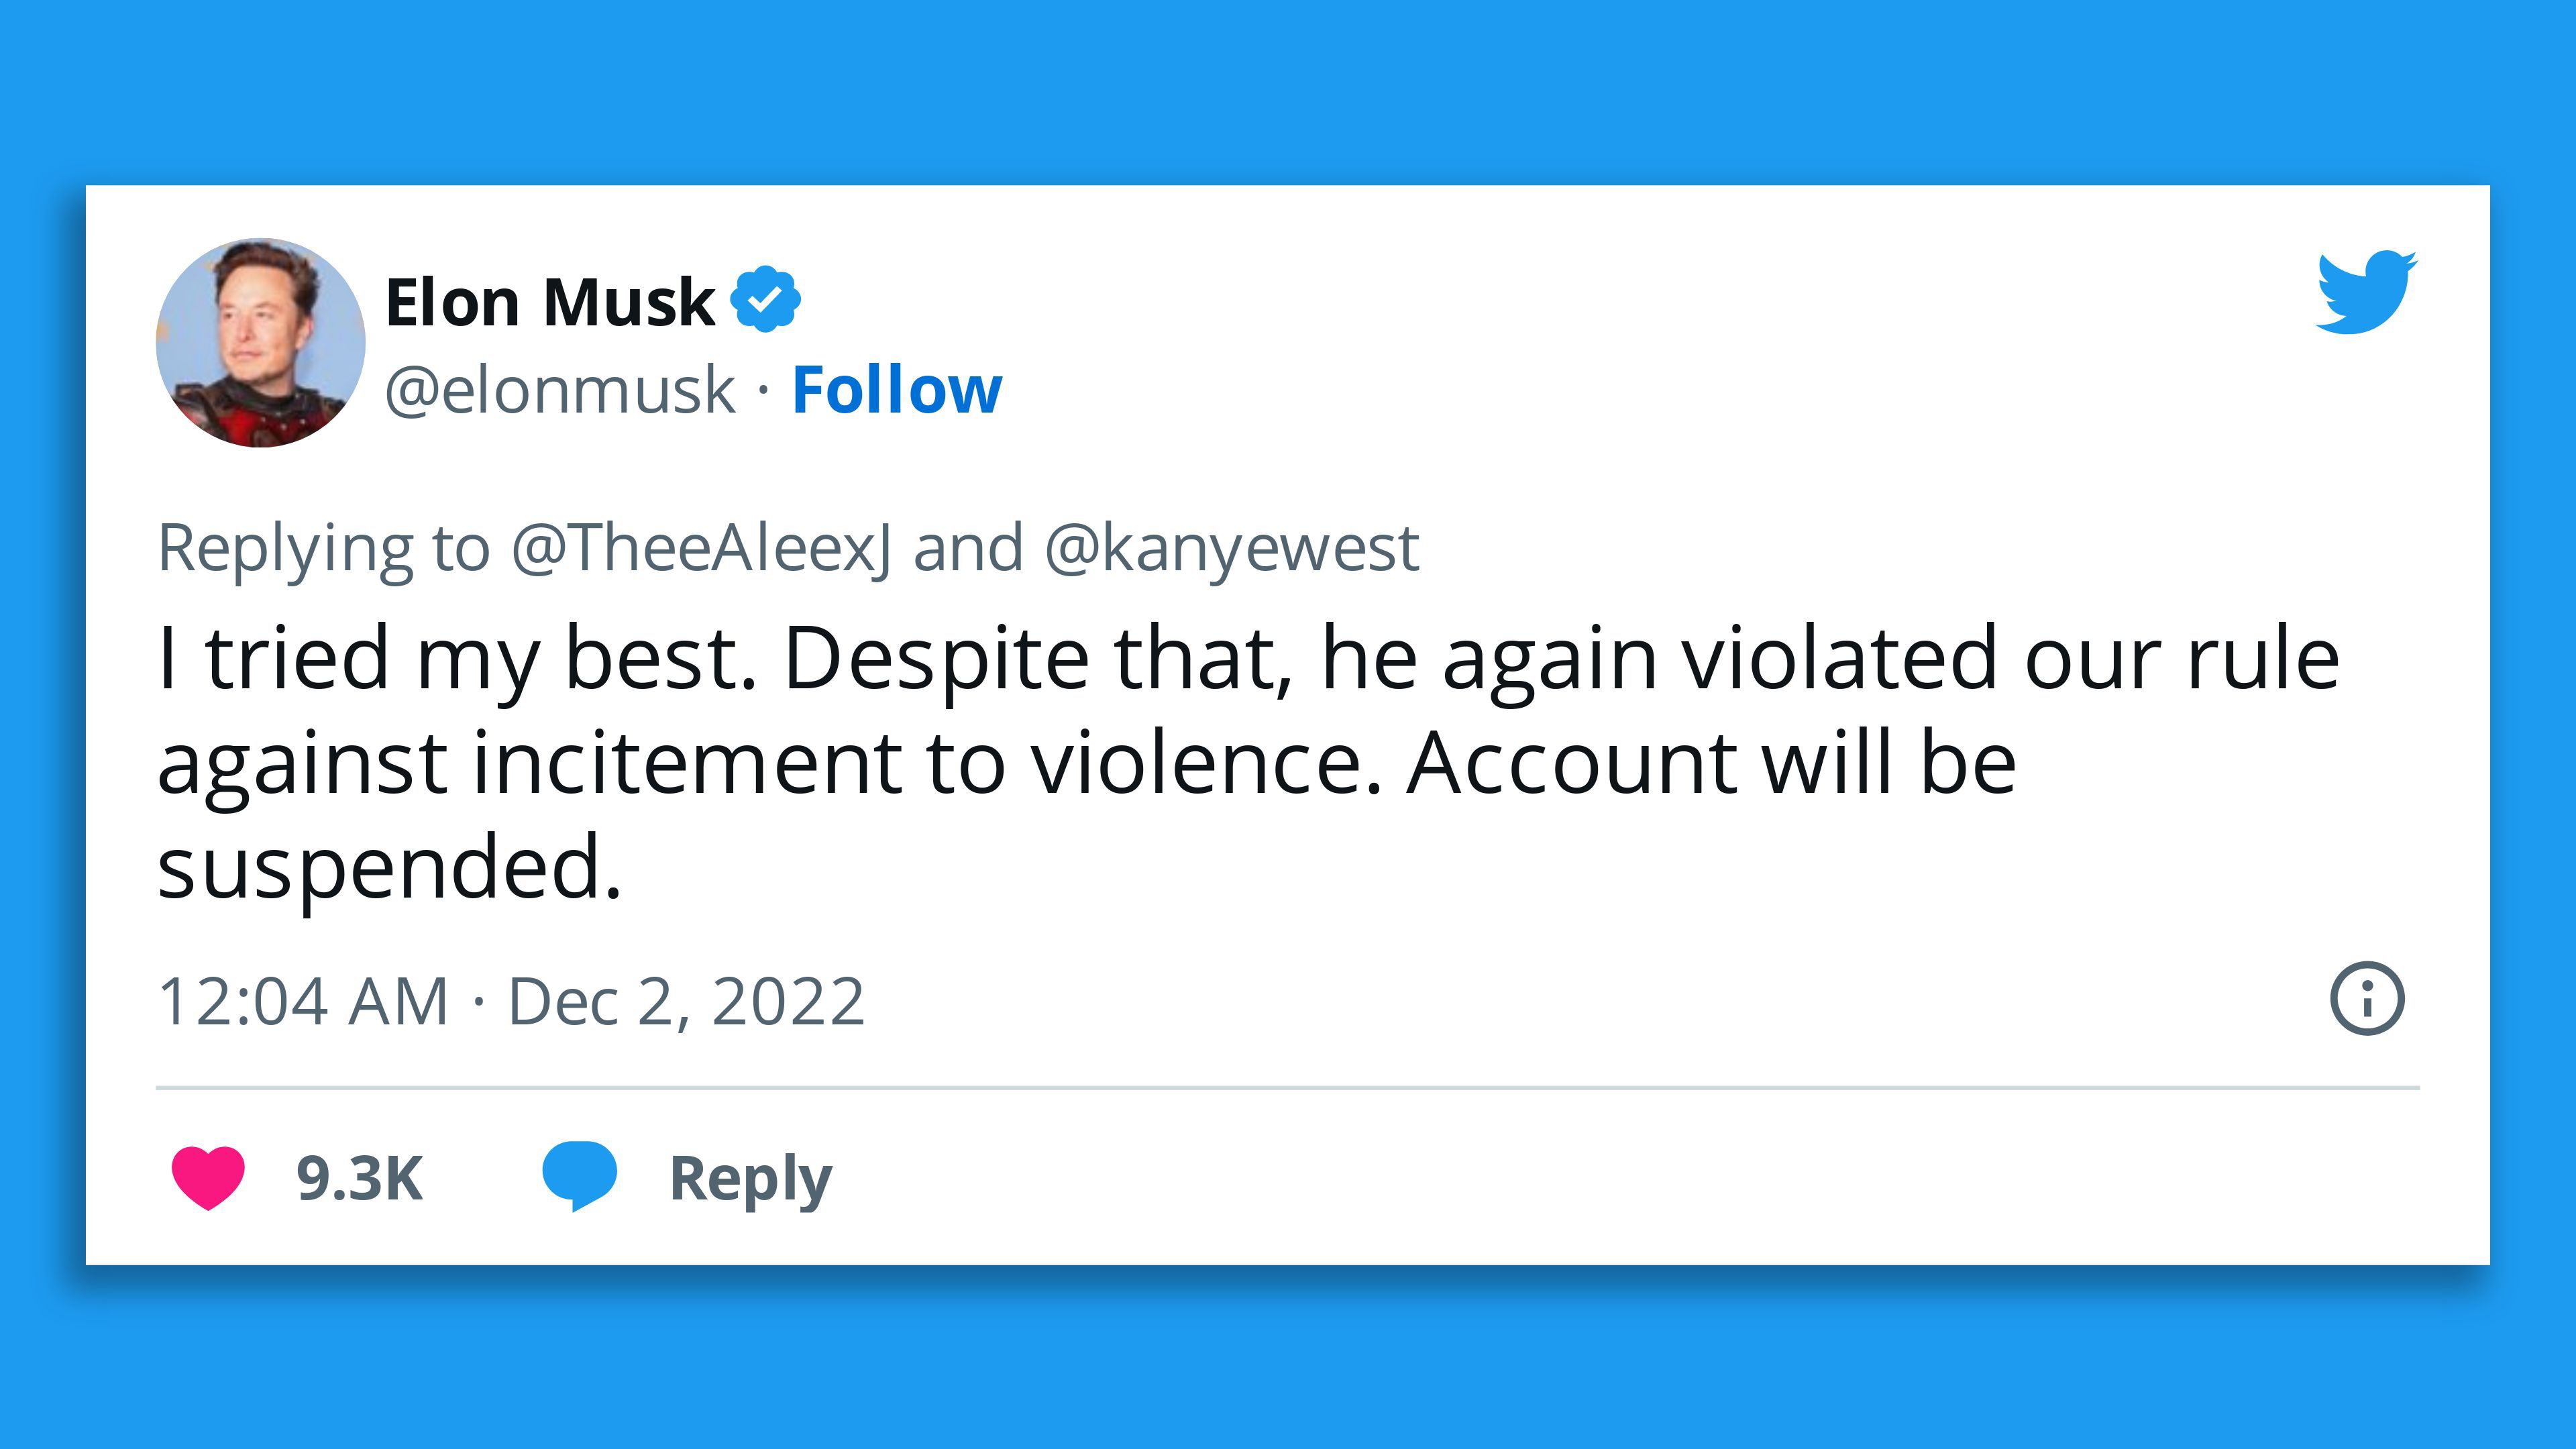 Elon Musk confirms in a tweet that Twitter has suspended Kanye West's account.